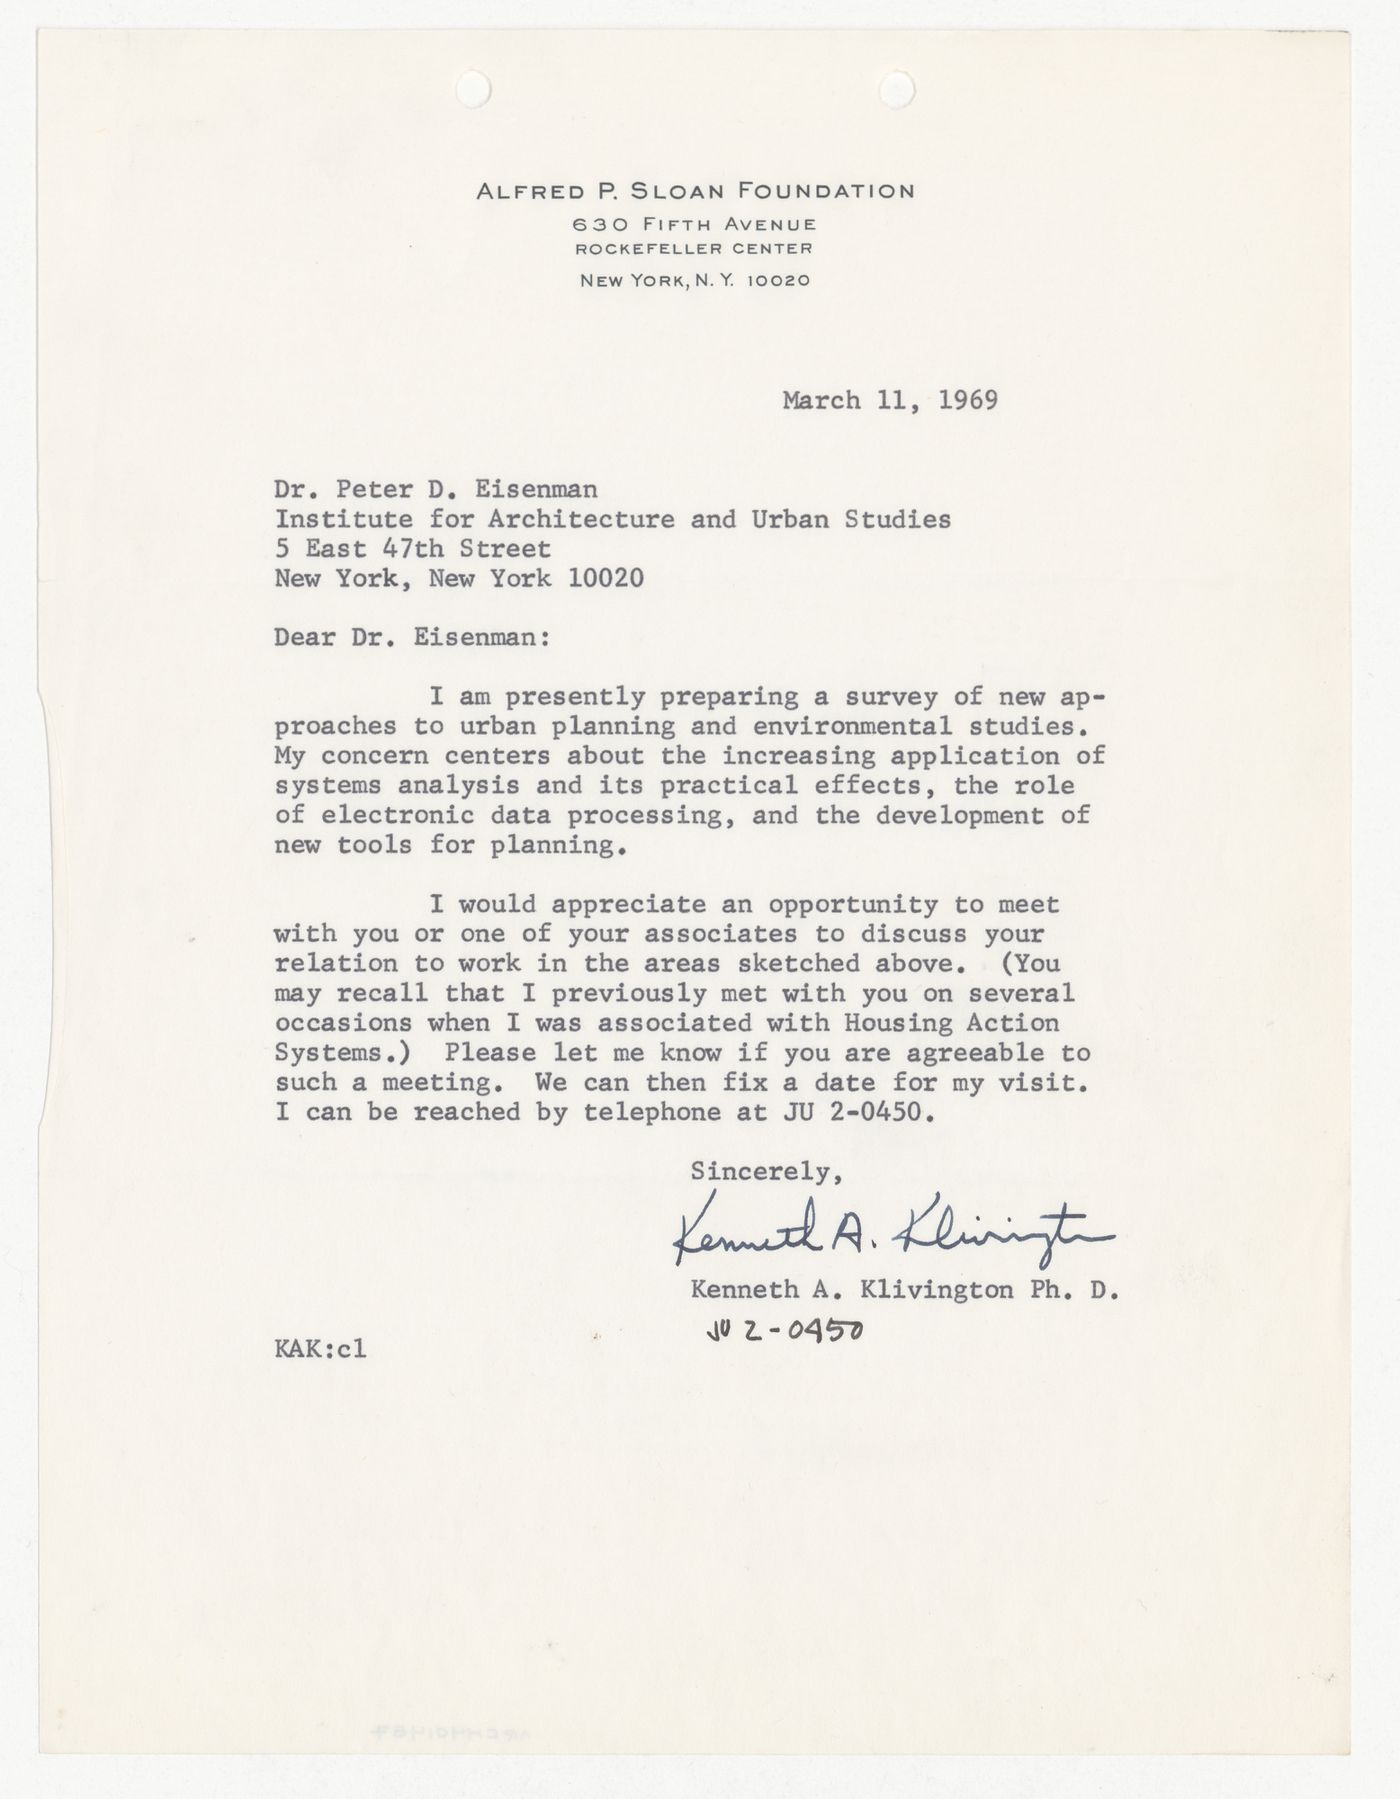 Letter from Kenneth A. Klivington to Peter D. Eisenman requesting a meeting with Eisenman to discuss new approaches to urban planning and environment studies